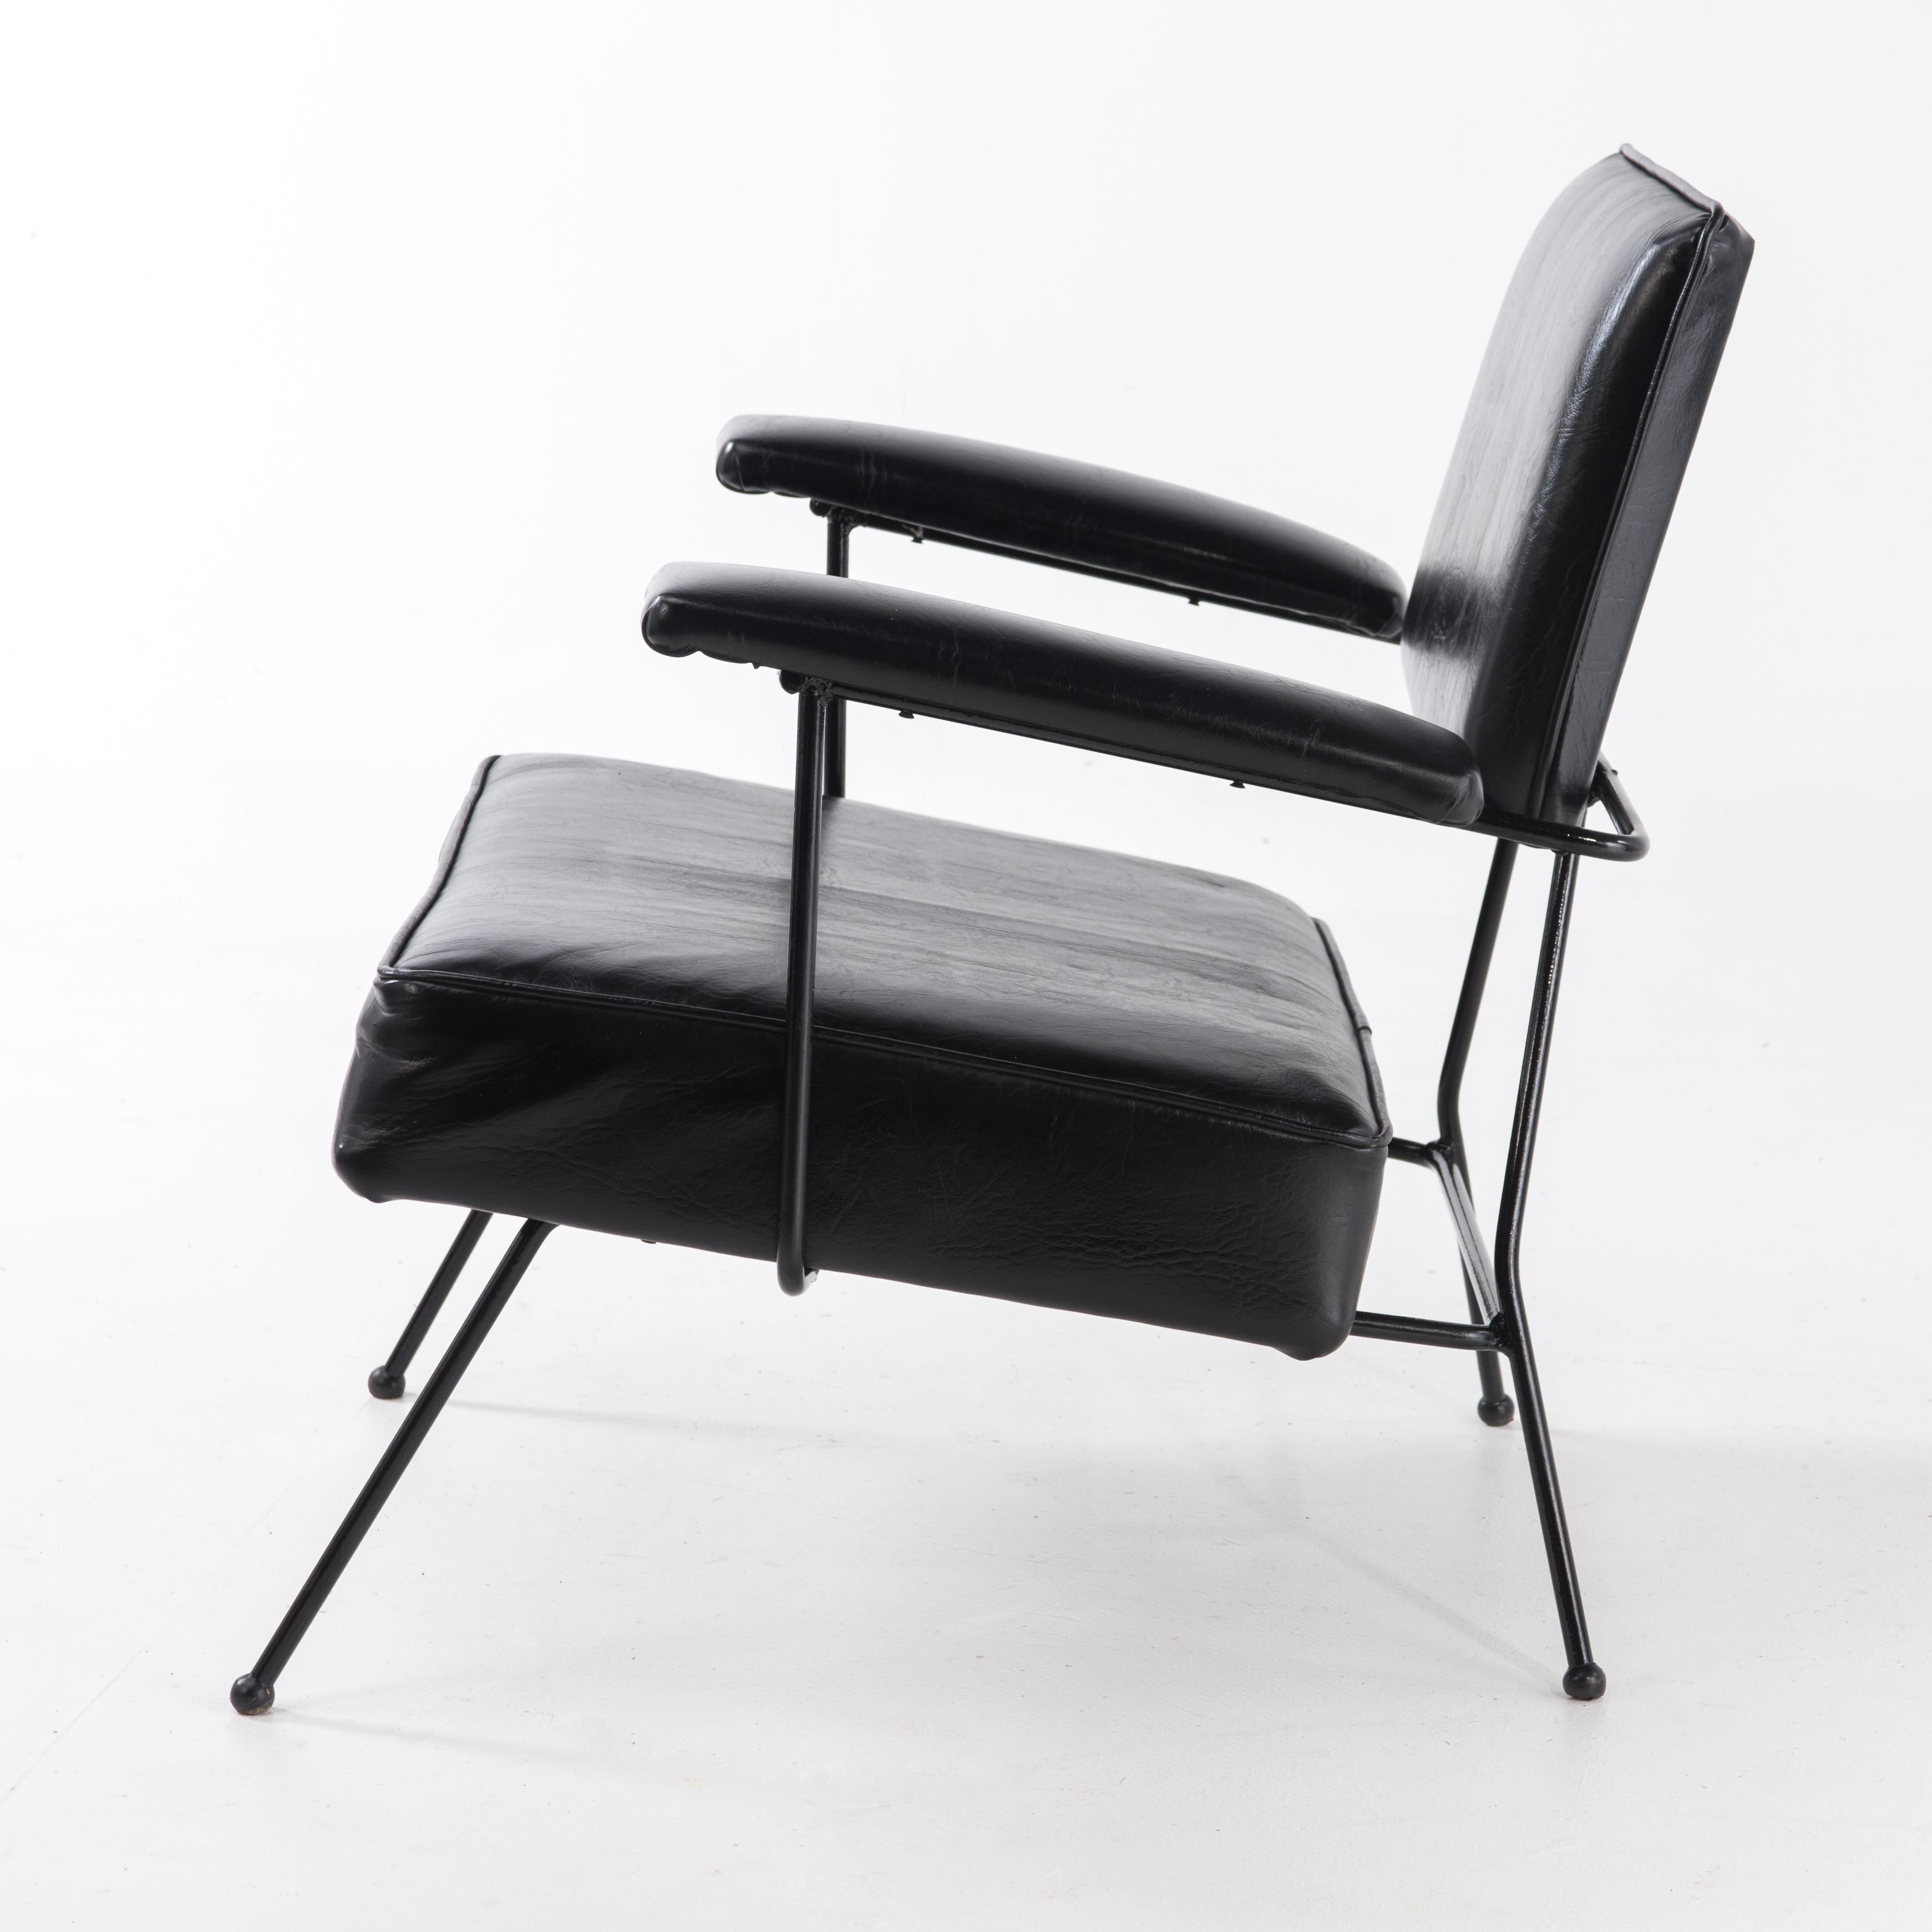 American Mid-Century Modern Black Adrian Pearsall for Craft Armchair Lounge Chair For Sale